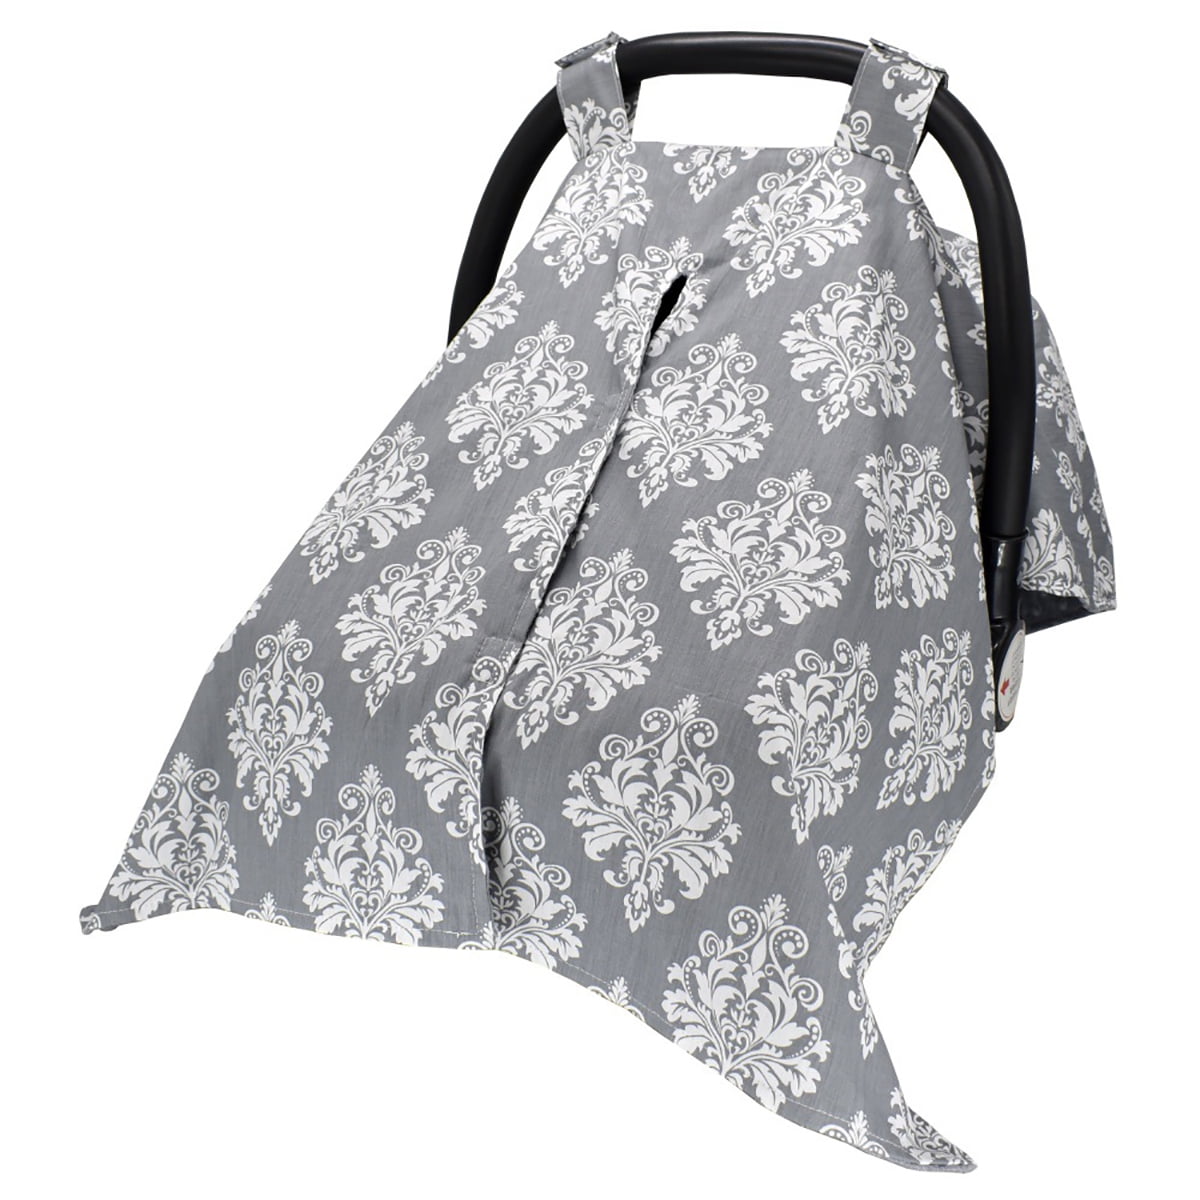 3 in 1 Baby Carseat Canopy White Floral Minky Sunshade Covers Nursing Cover Up Apron with Peekaboo